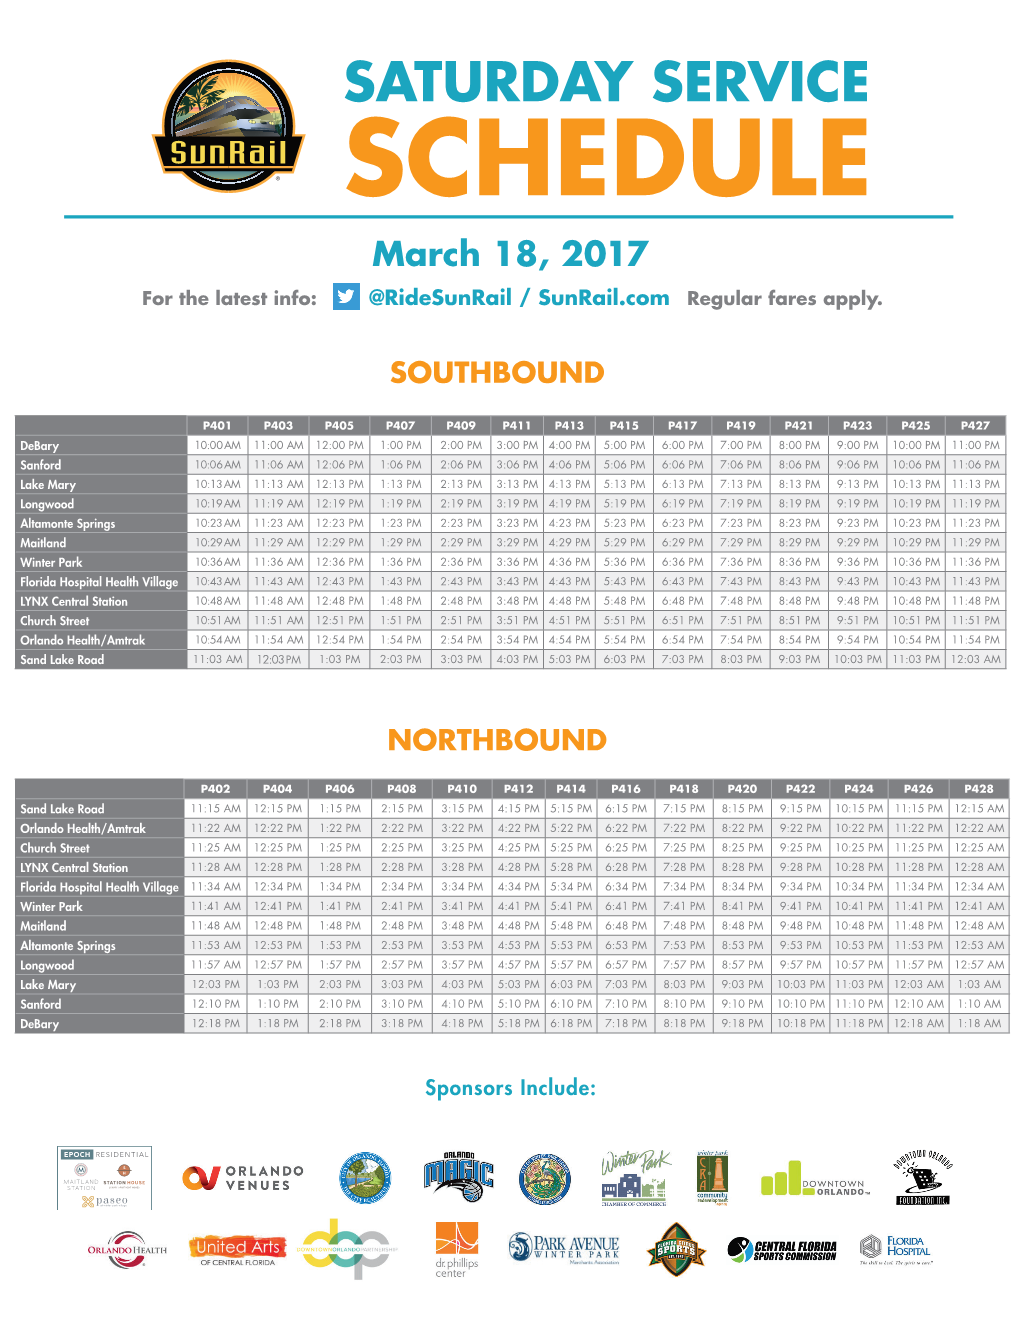 SCHEDULE March 18, 2017 for the Latest Info: @Ridesunrail / Sunrail.Com Regular Fares Apply